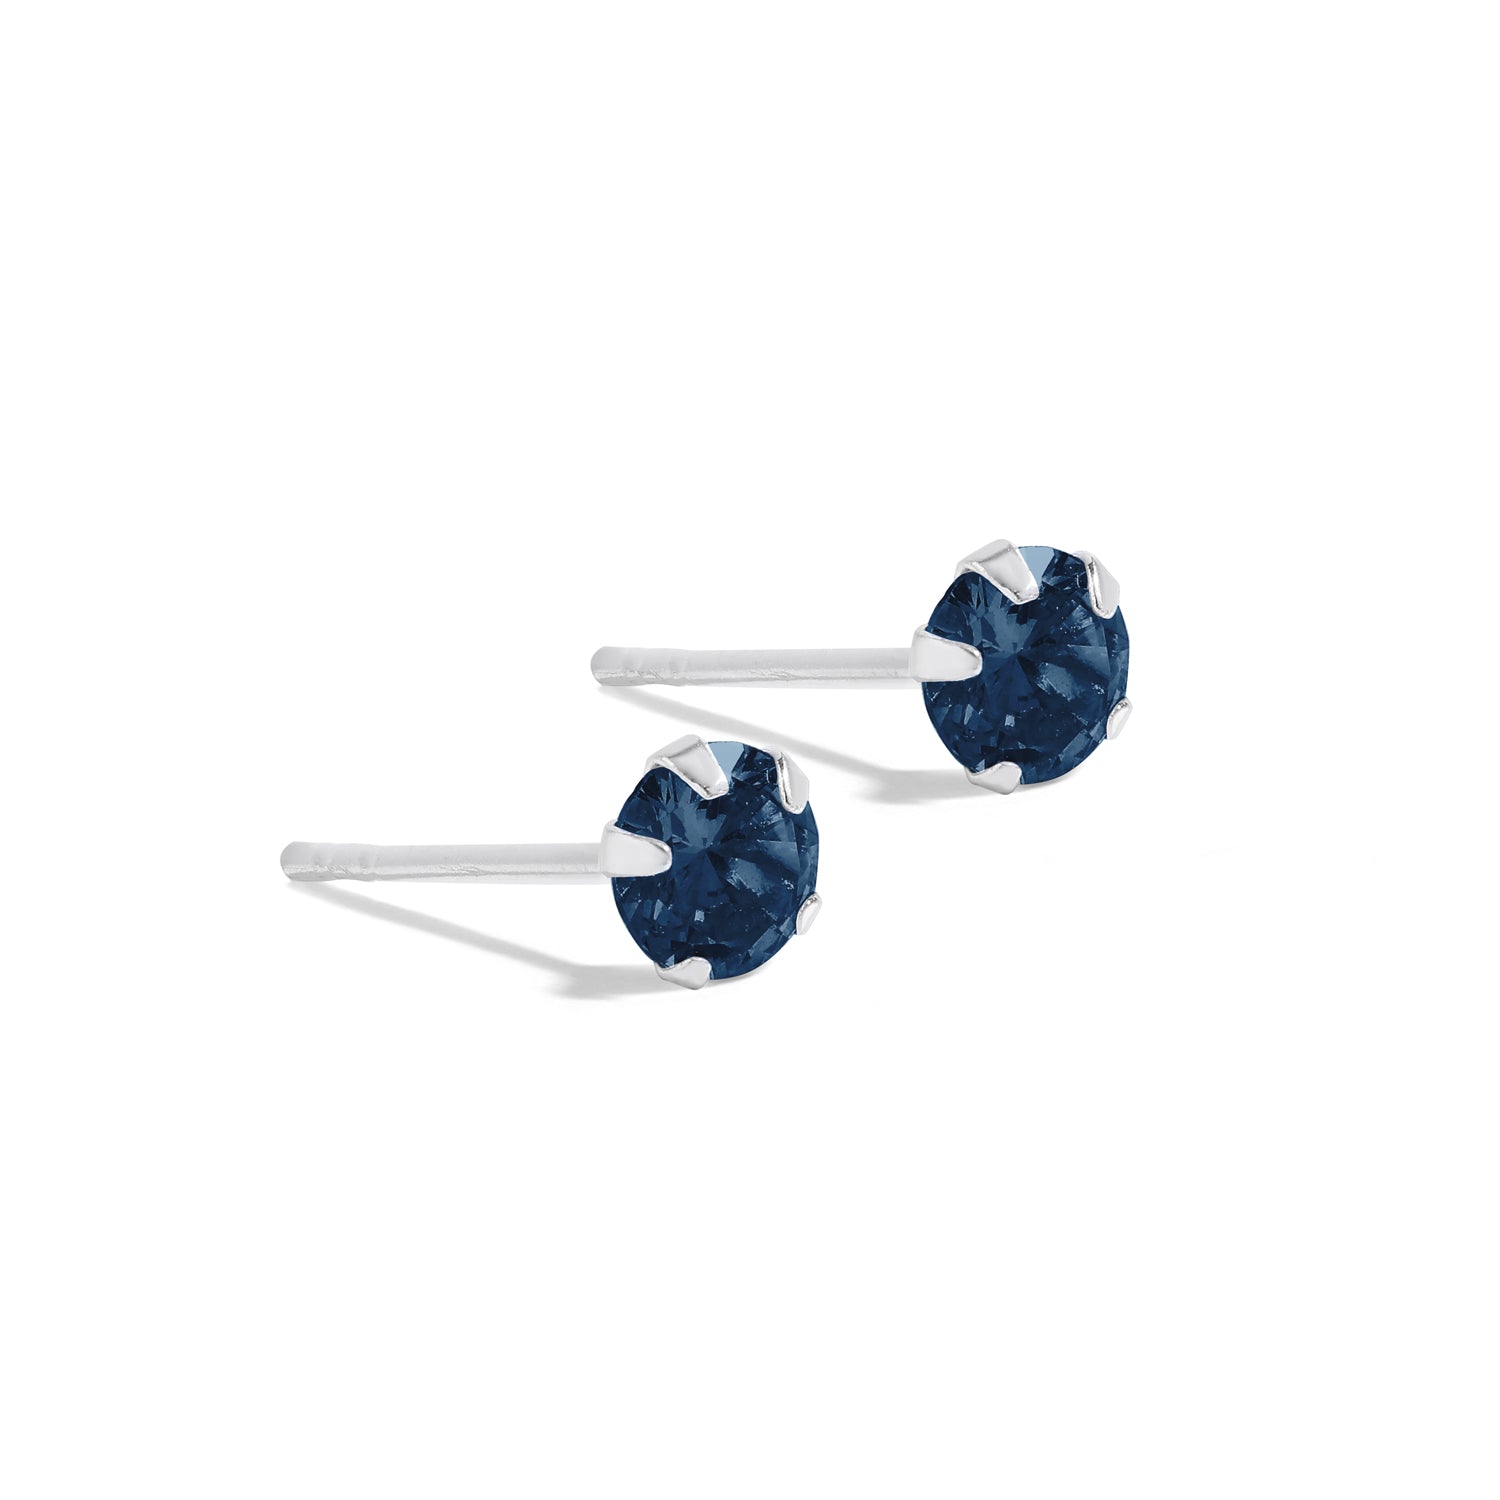 Minimalist and elegant earrings. 925 silver ear studs set with sapphire cubic zirconia stones.